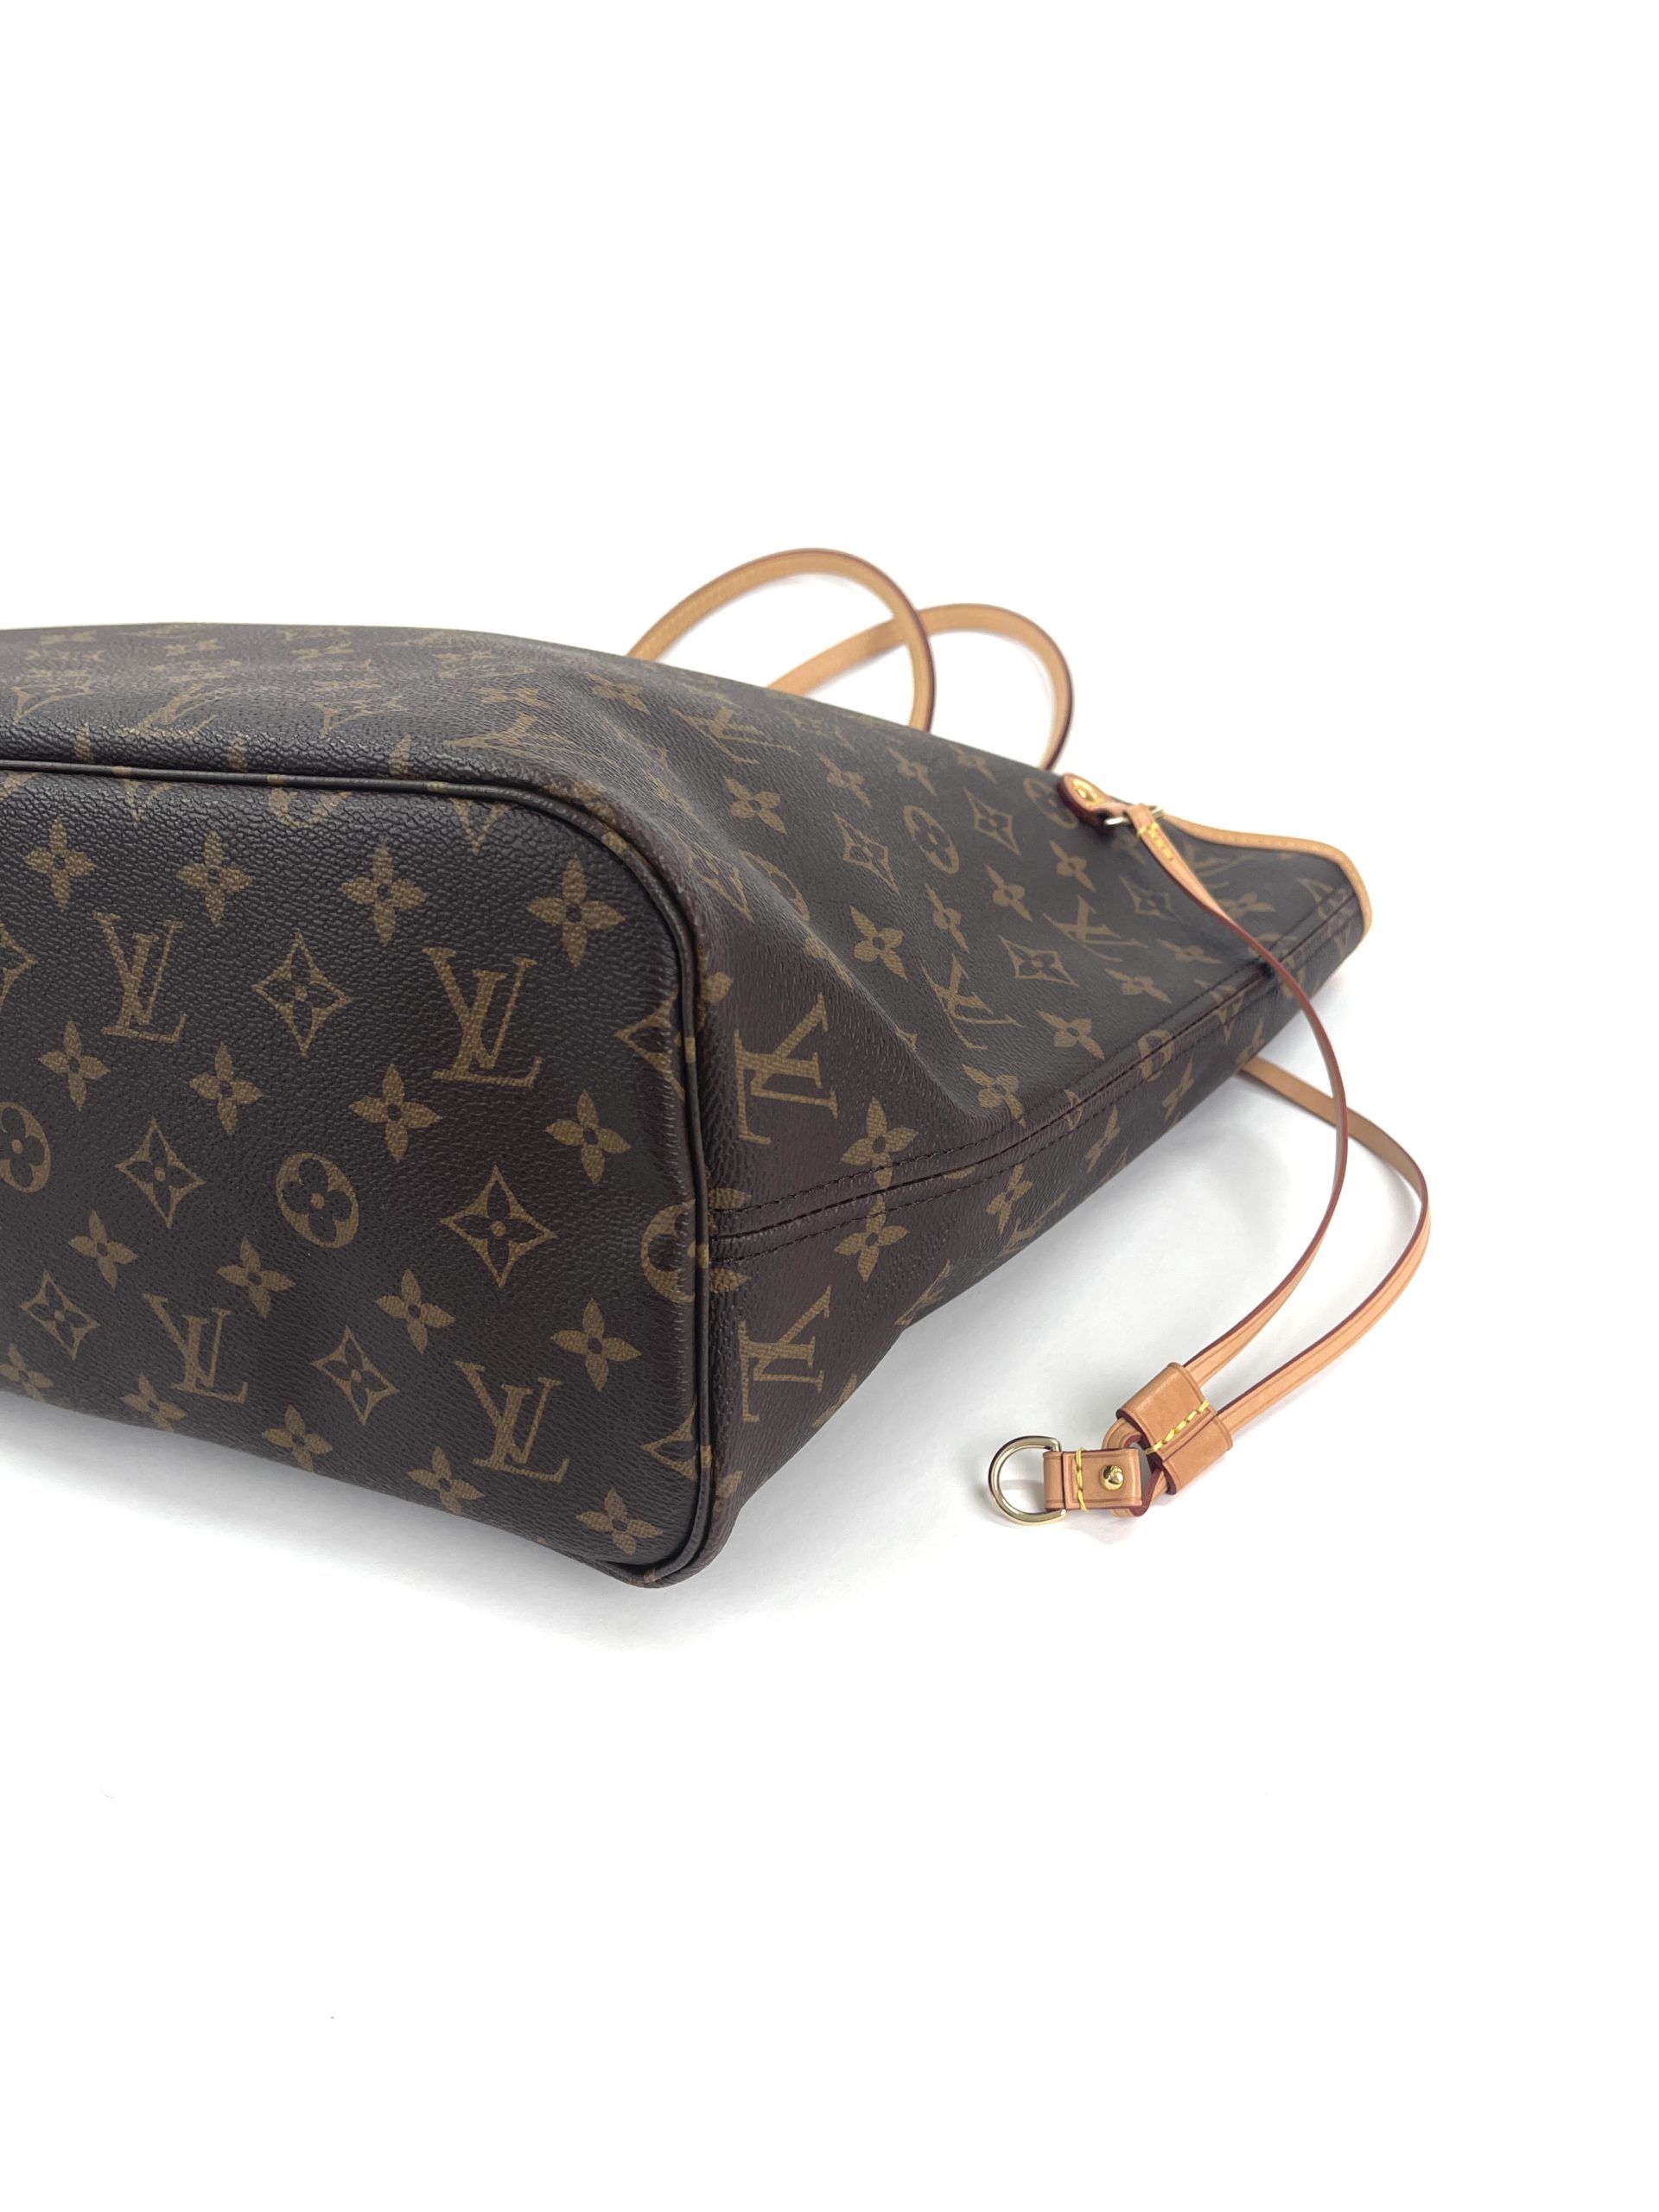 louis vuitton with pink lining